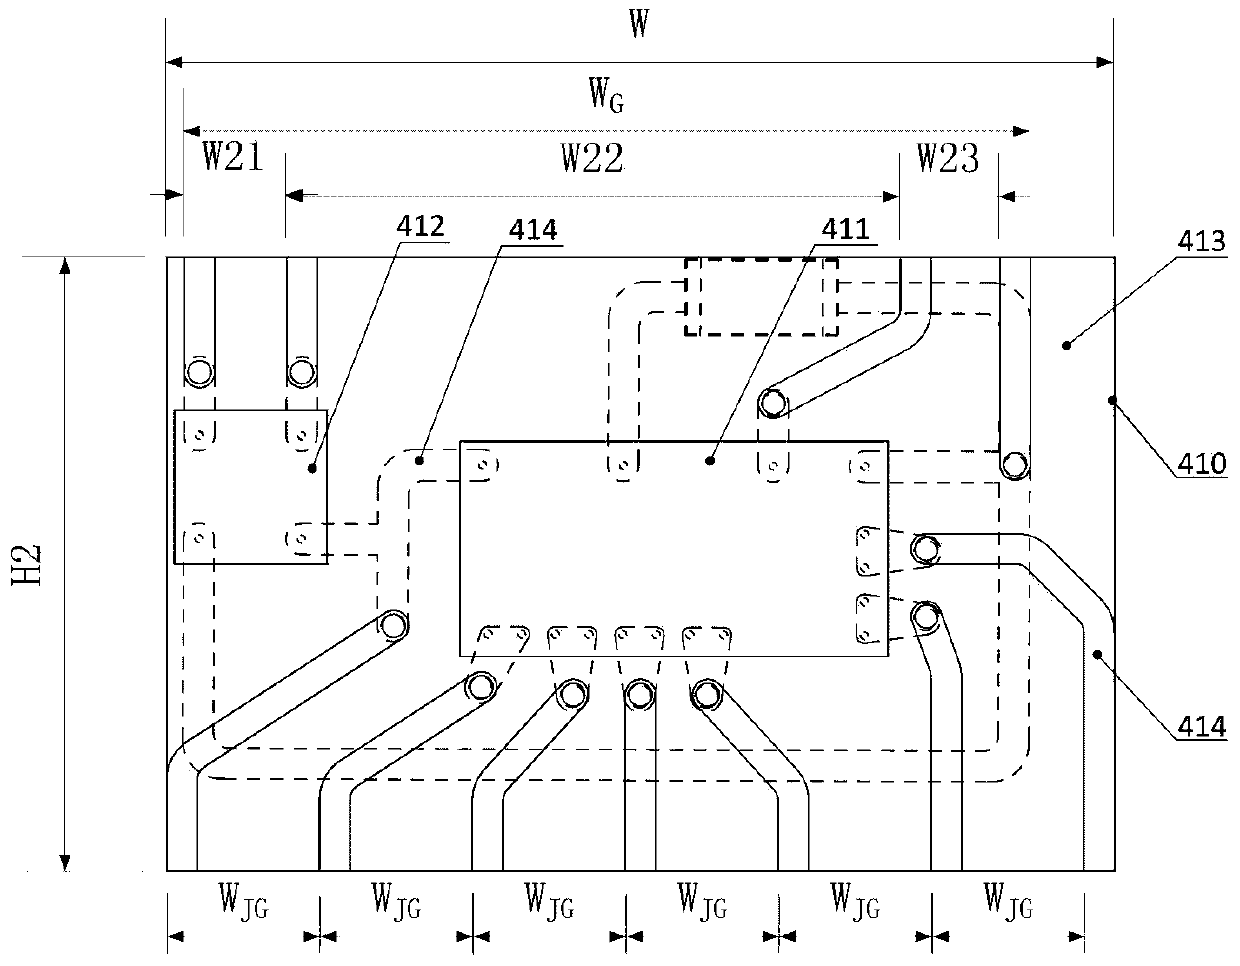 LED (light emitting diode) driving power supply large chip